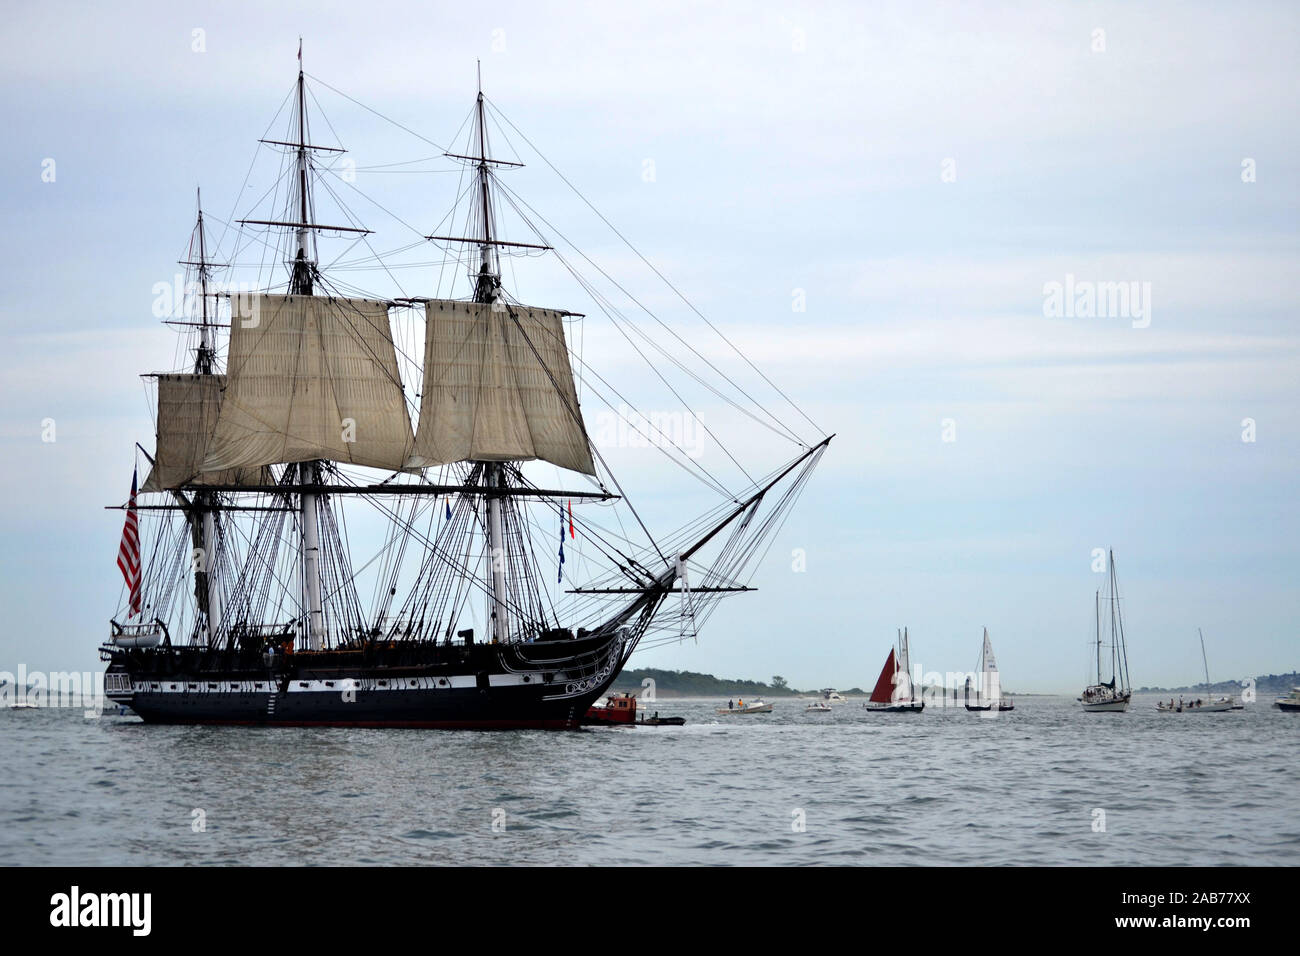 BOSTON, Mass. (Aug. 19, 2012) USS Constitution sets sail for the first time since 1997 during an underway demonstration commemorating Guerriere Day. Constitution is the world's oldest commissioned warship afloat. Stock Photo